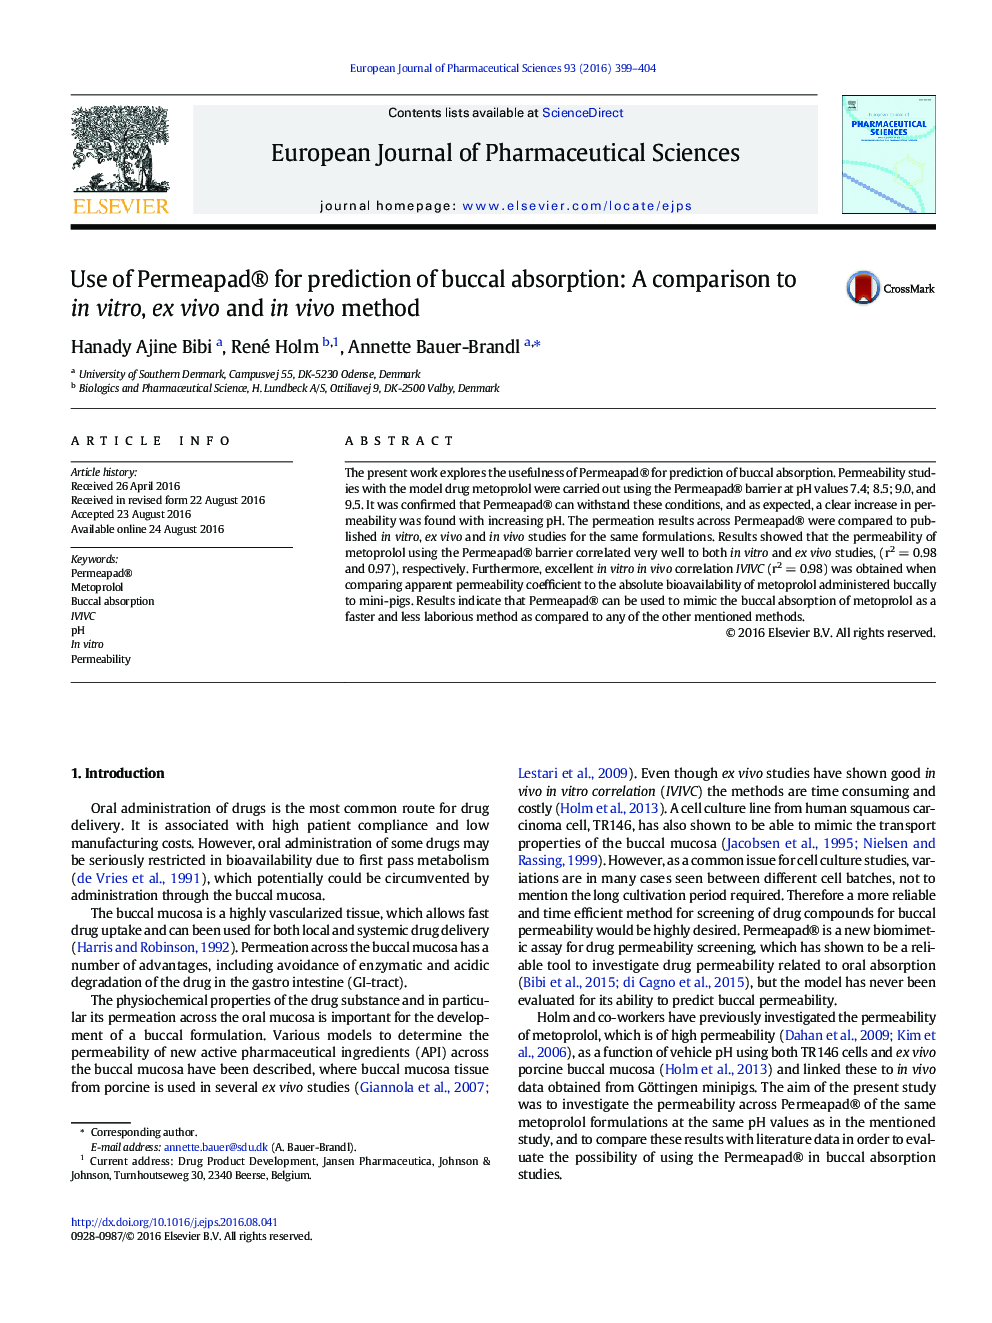 Use of Permeapad® for prediction of buccal absorption: A comparison to in vitro, ex vivo and in vivo method